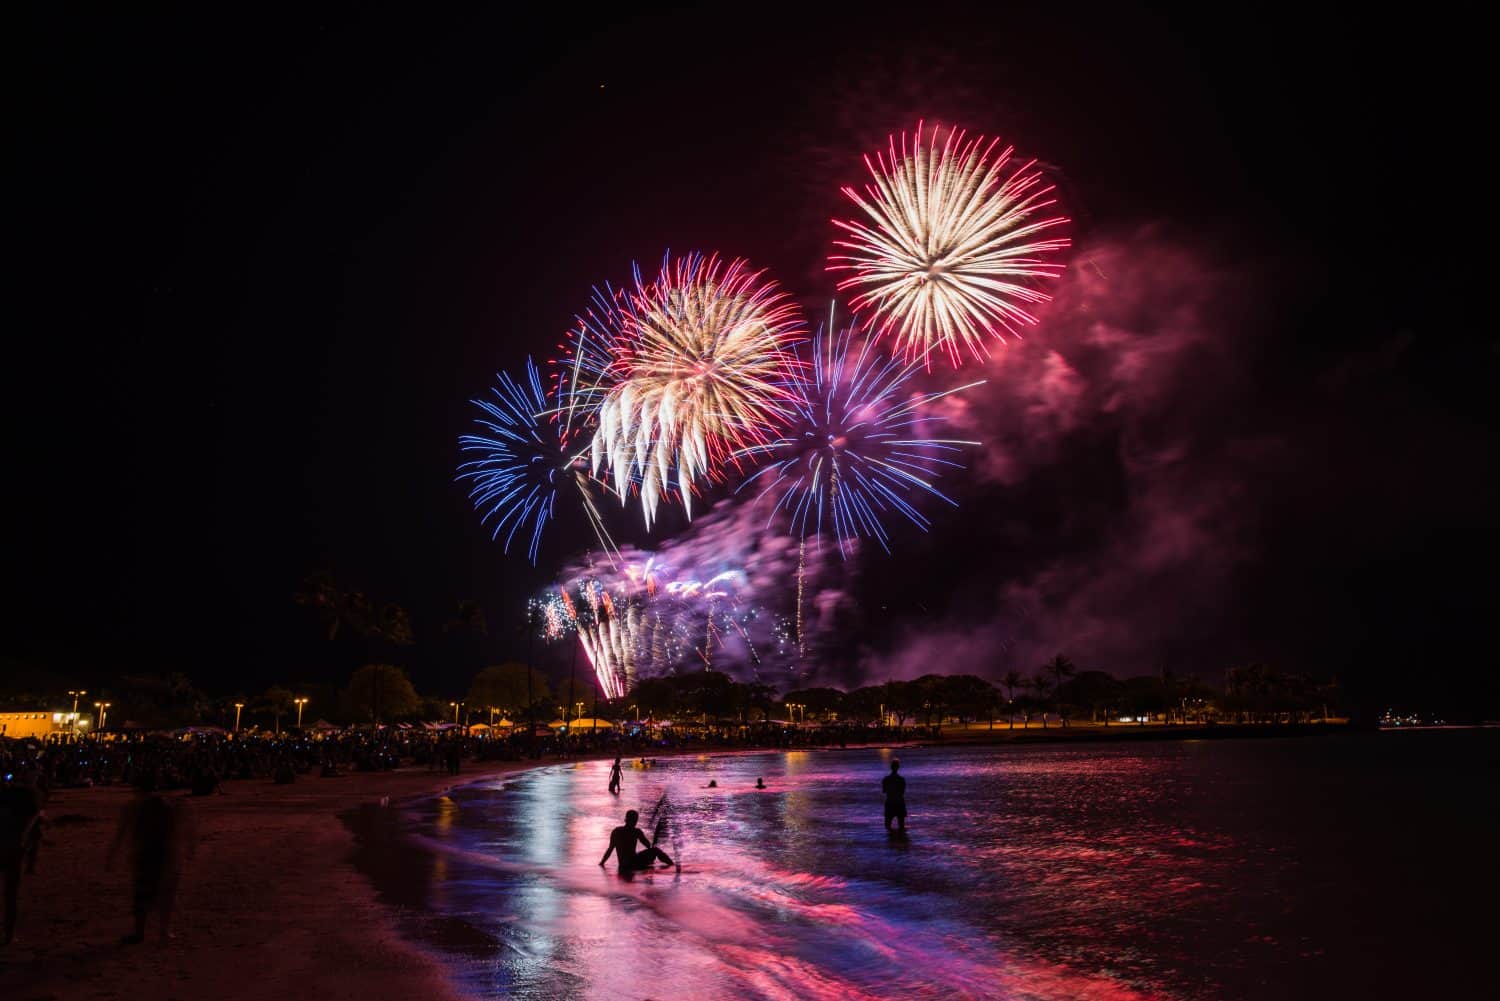 Fireworks light up the night sky over Honolulu during Hawaii's largest fireworks display on the fourth of July at Magic Island Park on the island of Oahu.